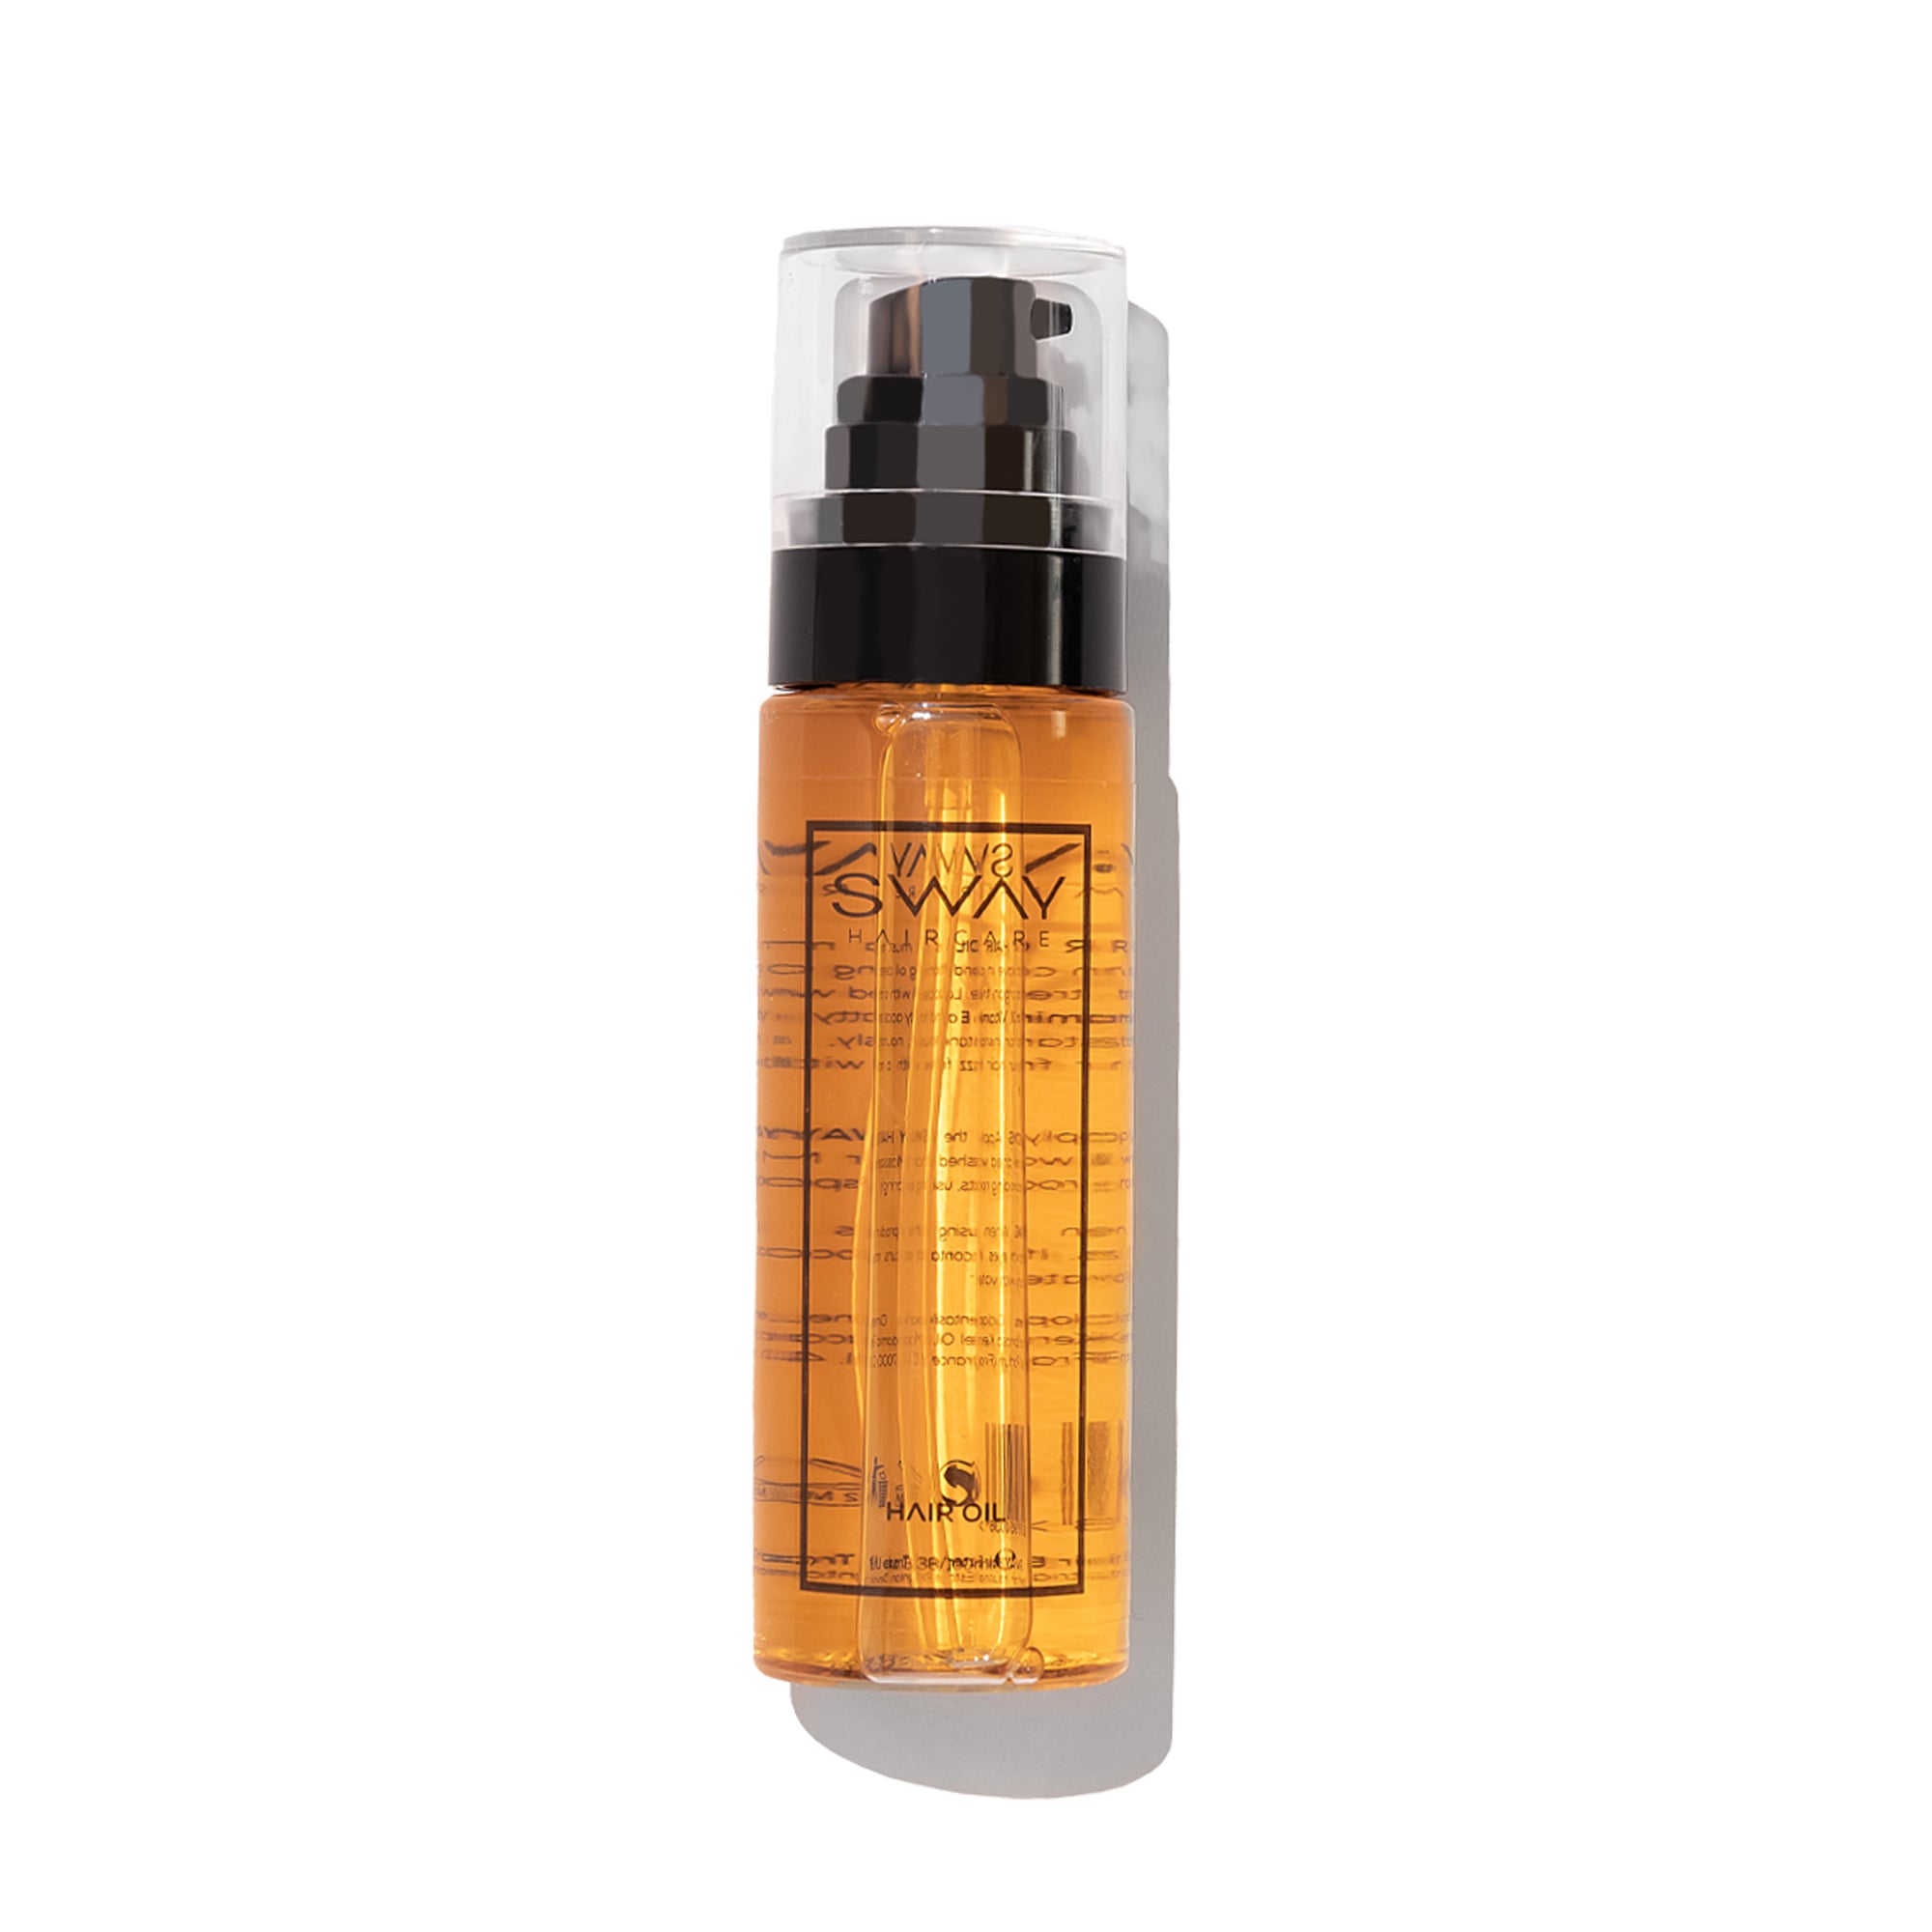 SWAY Hair Oil: Luxurious care for your hair. Absorbs instantly, nourishes, and leaves hair frizz-free with a mirror-like shine. Suitable for all hair types. Enhance your hair&